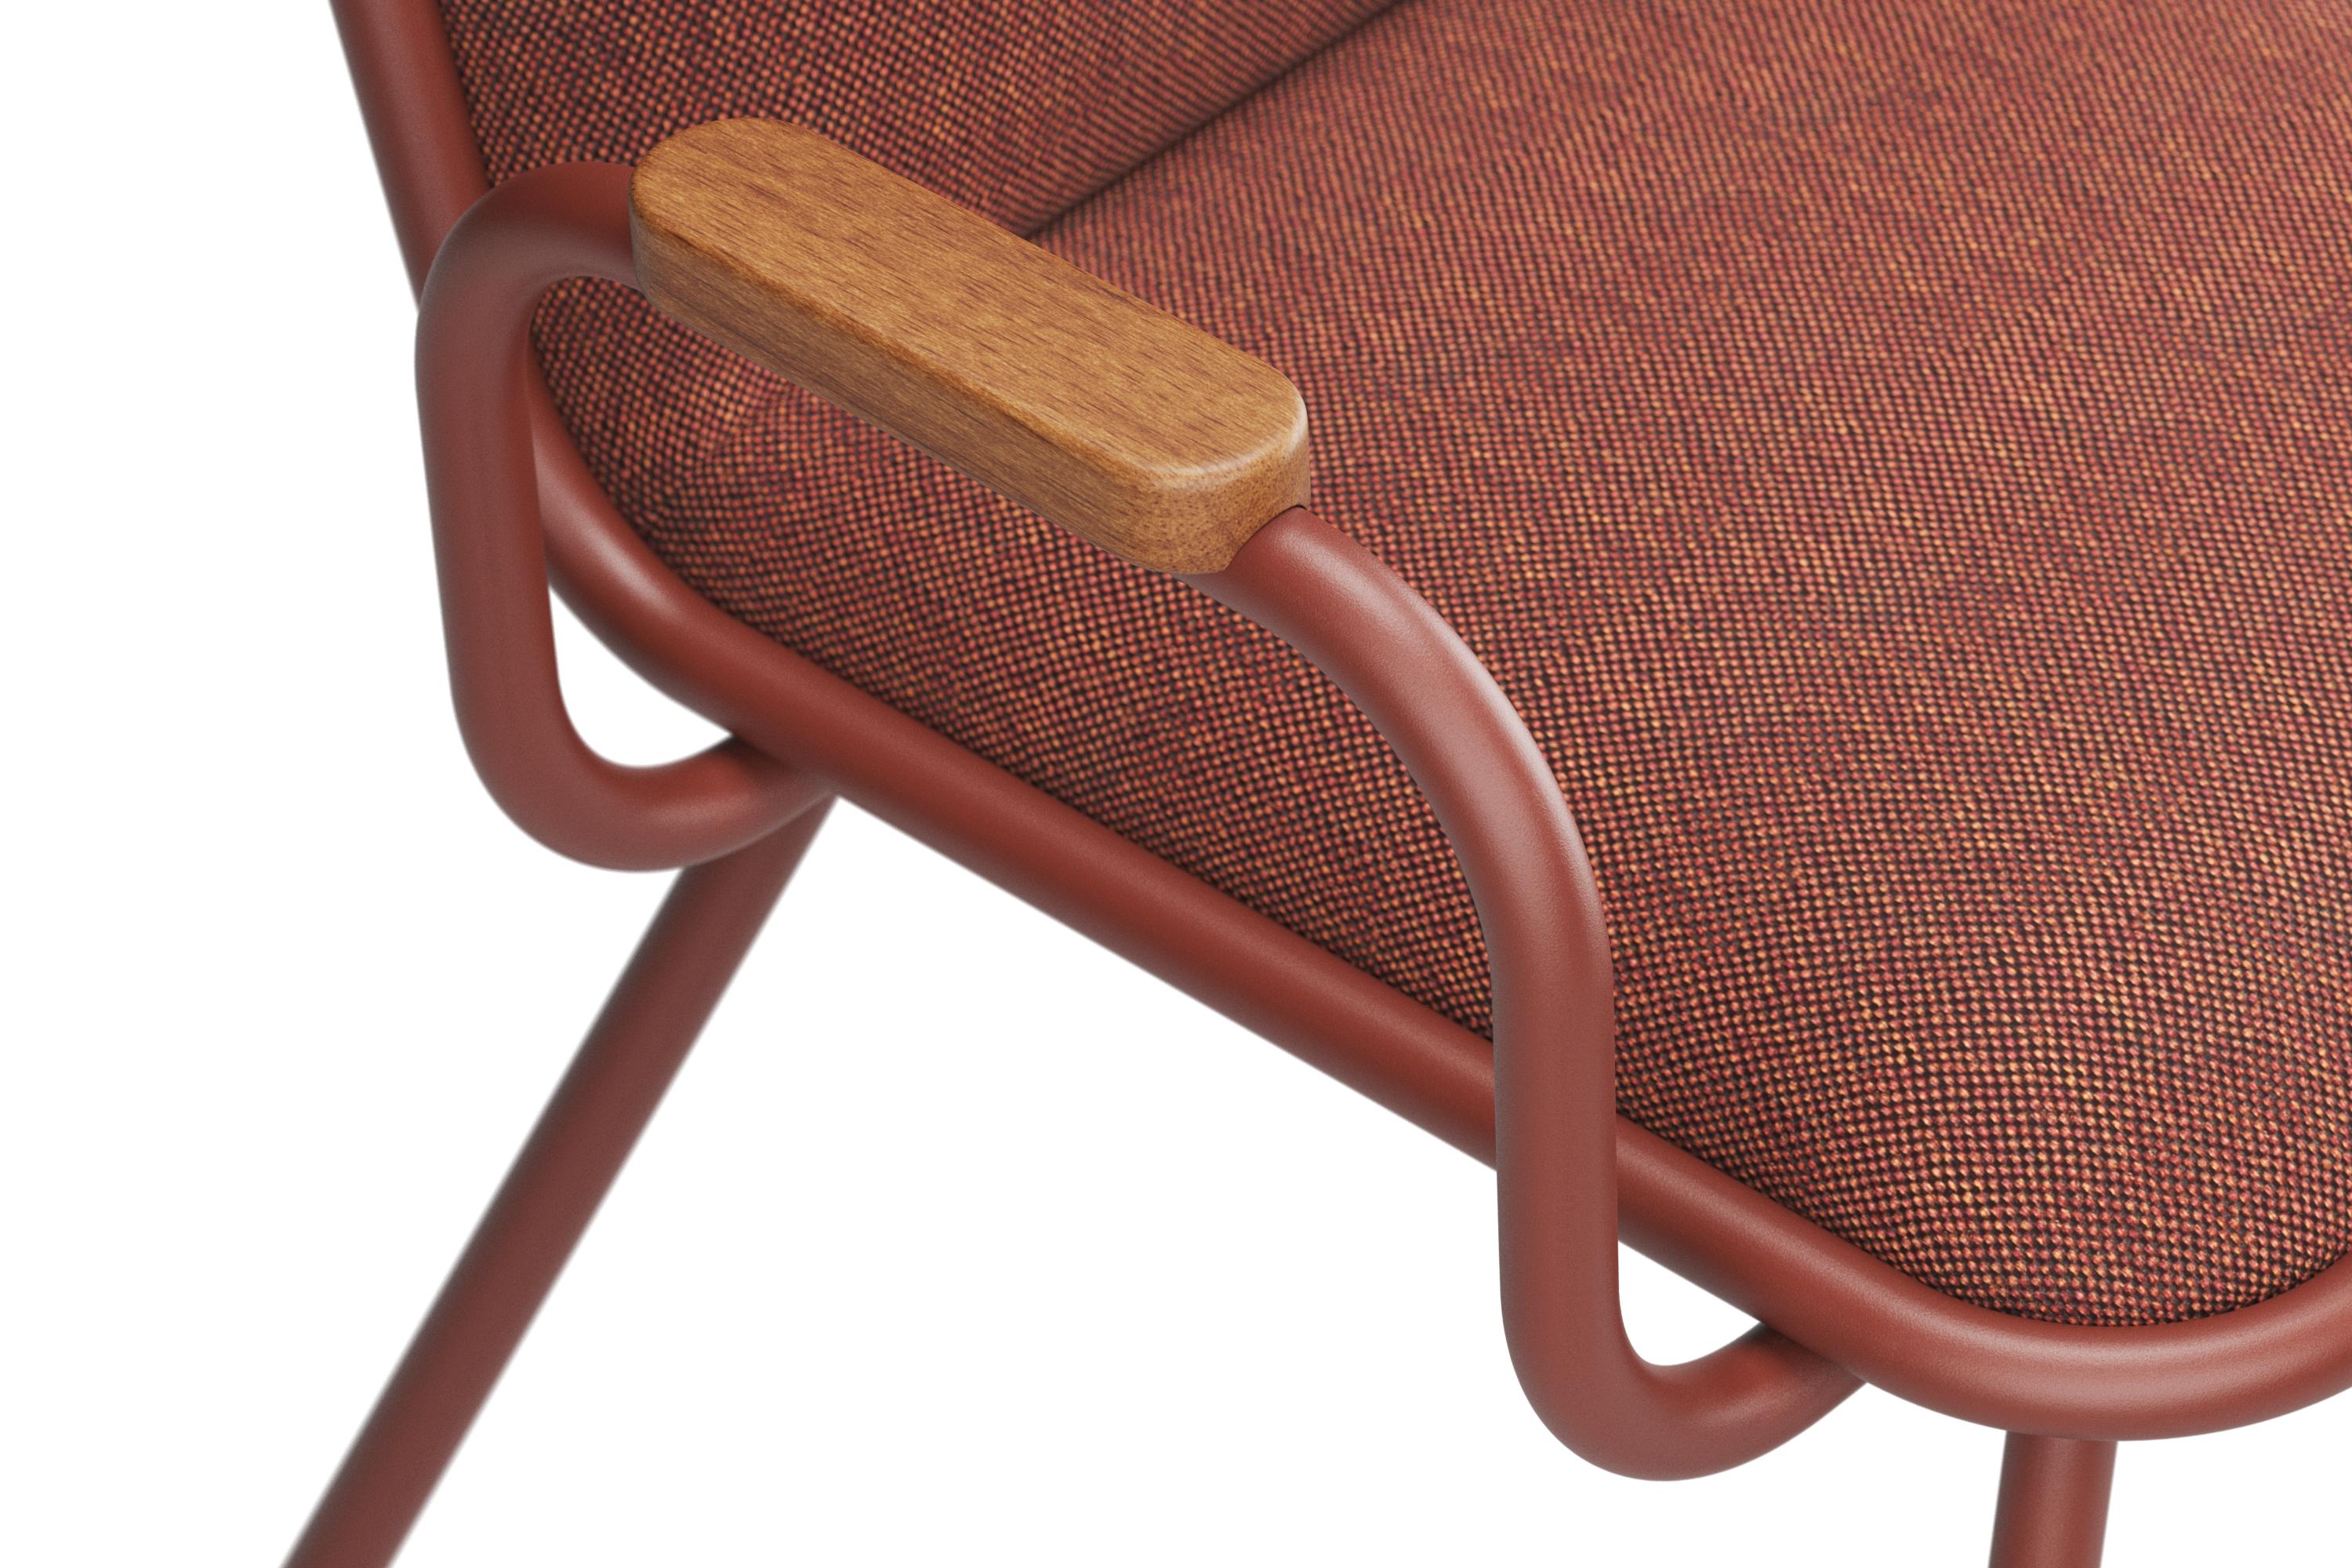 Elevating the classic Dulwich design with the addition of armrests, this Dulwich chair with armrests offers enhanced comfort and support without compromising its timeless appeal. The powder-coated metal frame provides a sturdy foundation, while the